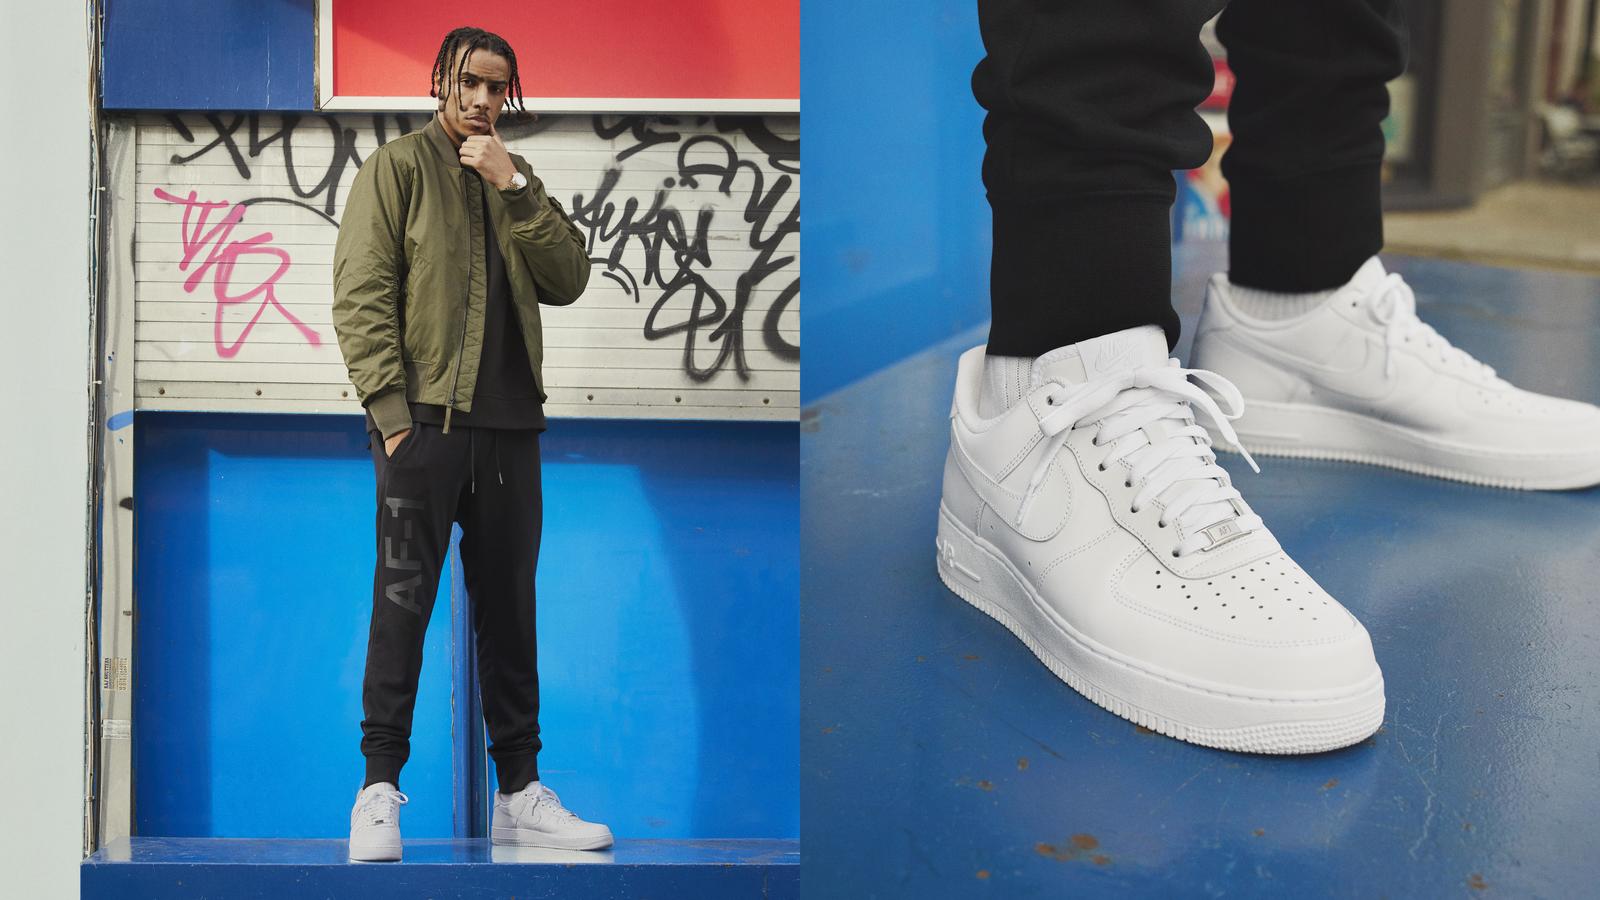 AJ Tracey, Little Simz And More Share Their Perspectives On The Nike Air Force 1's Legacy | Complex